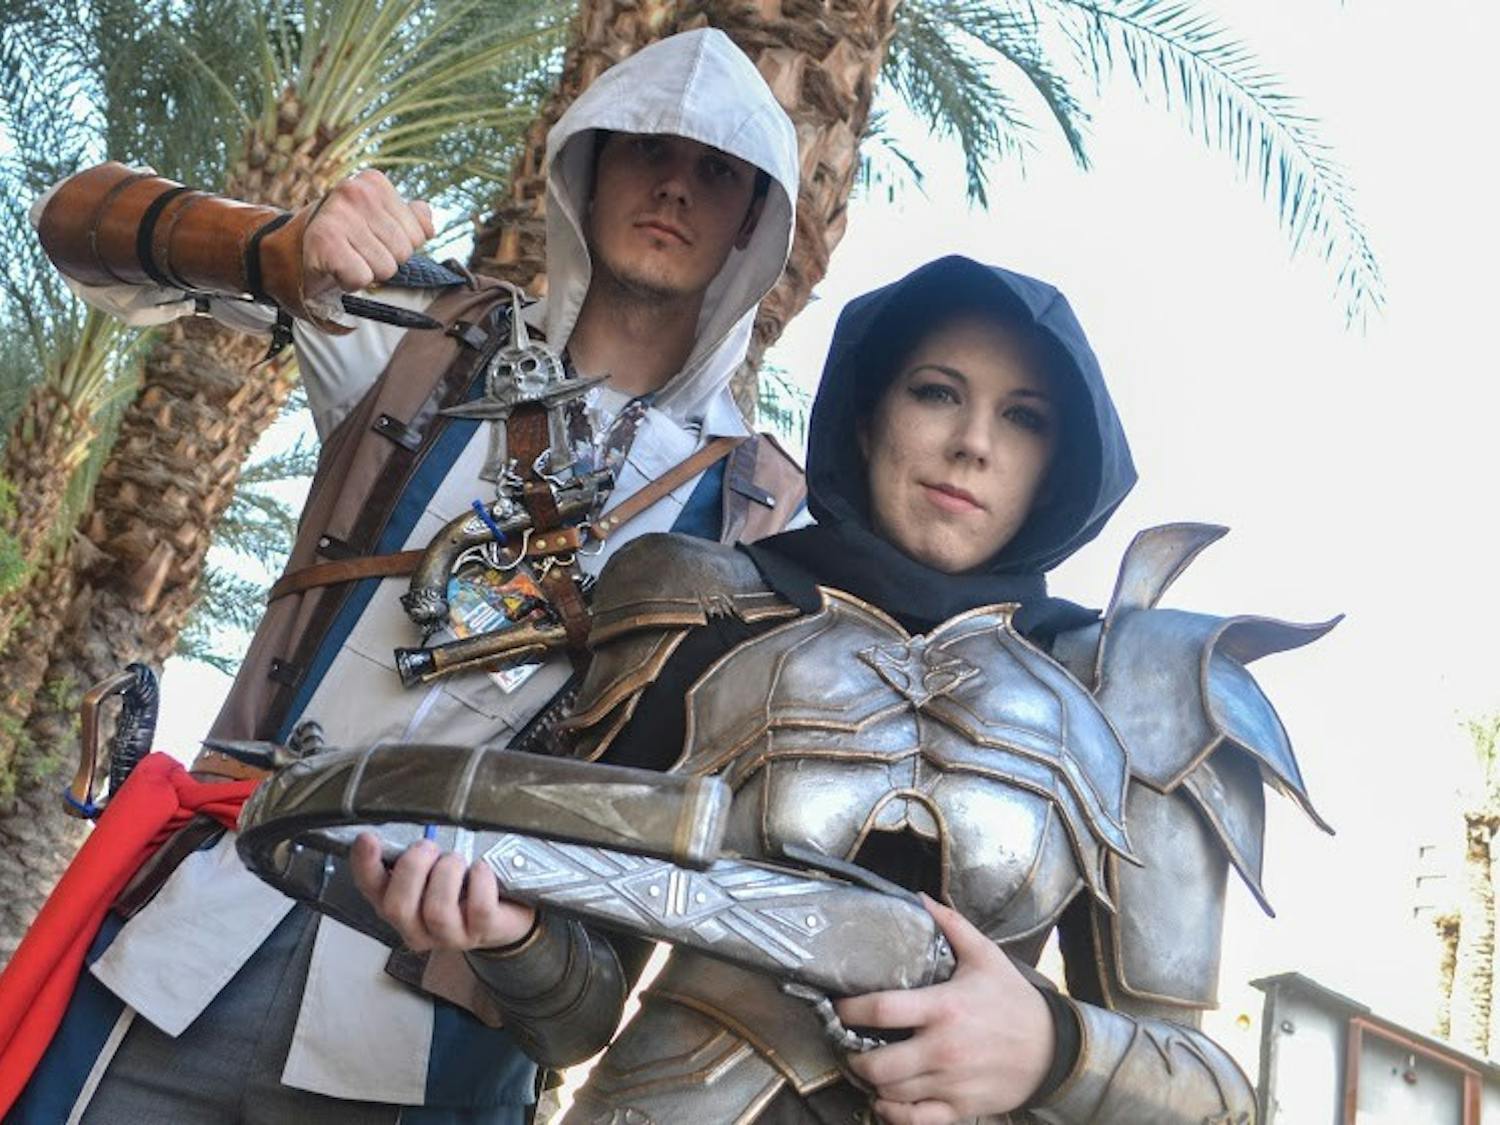 Comicon cosplayers invade downtown Phoenix